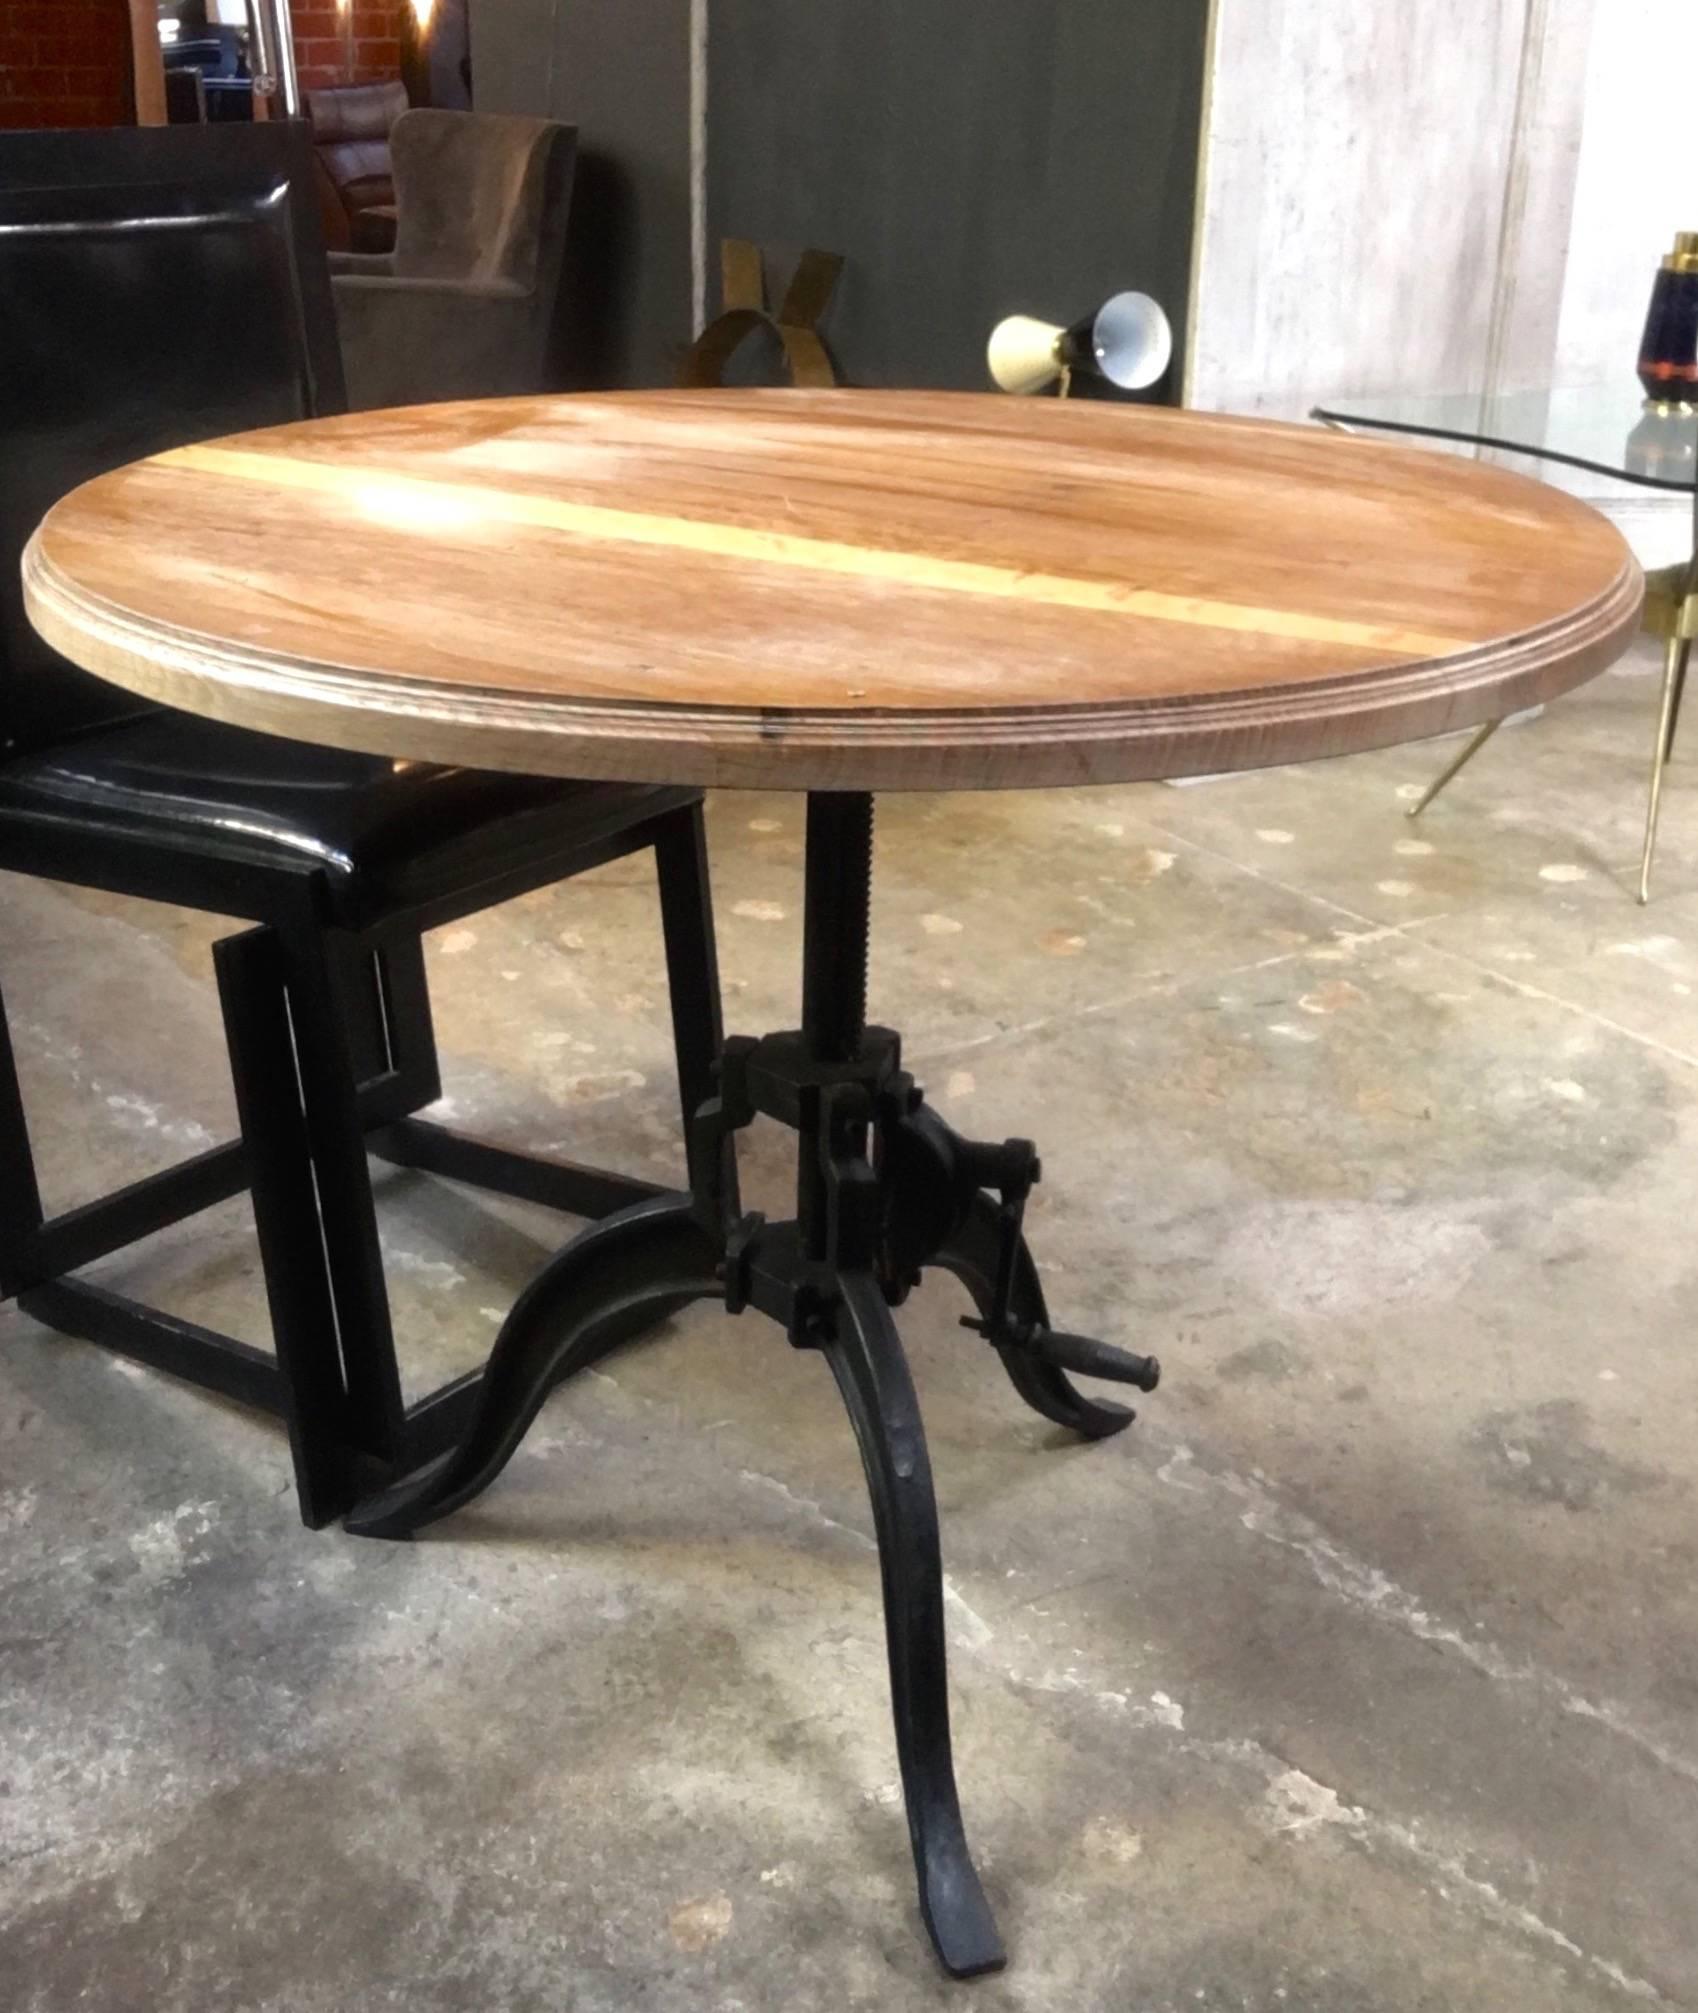 Industrial vintage design
Adjustable table : Just crank it up or down; easy as 1-2-3!!!